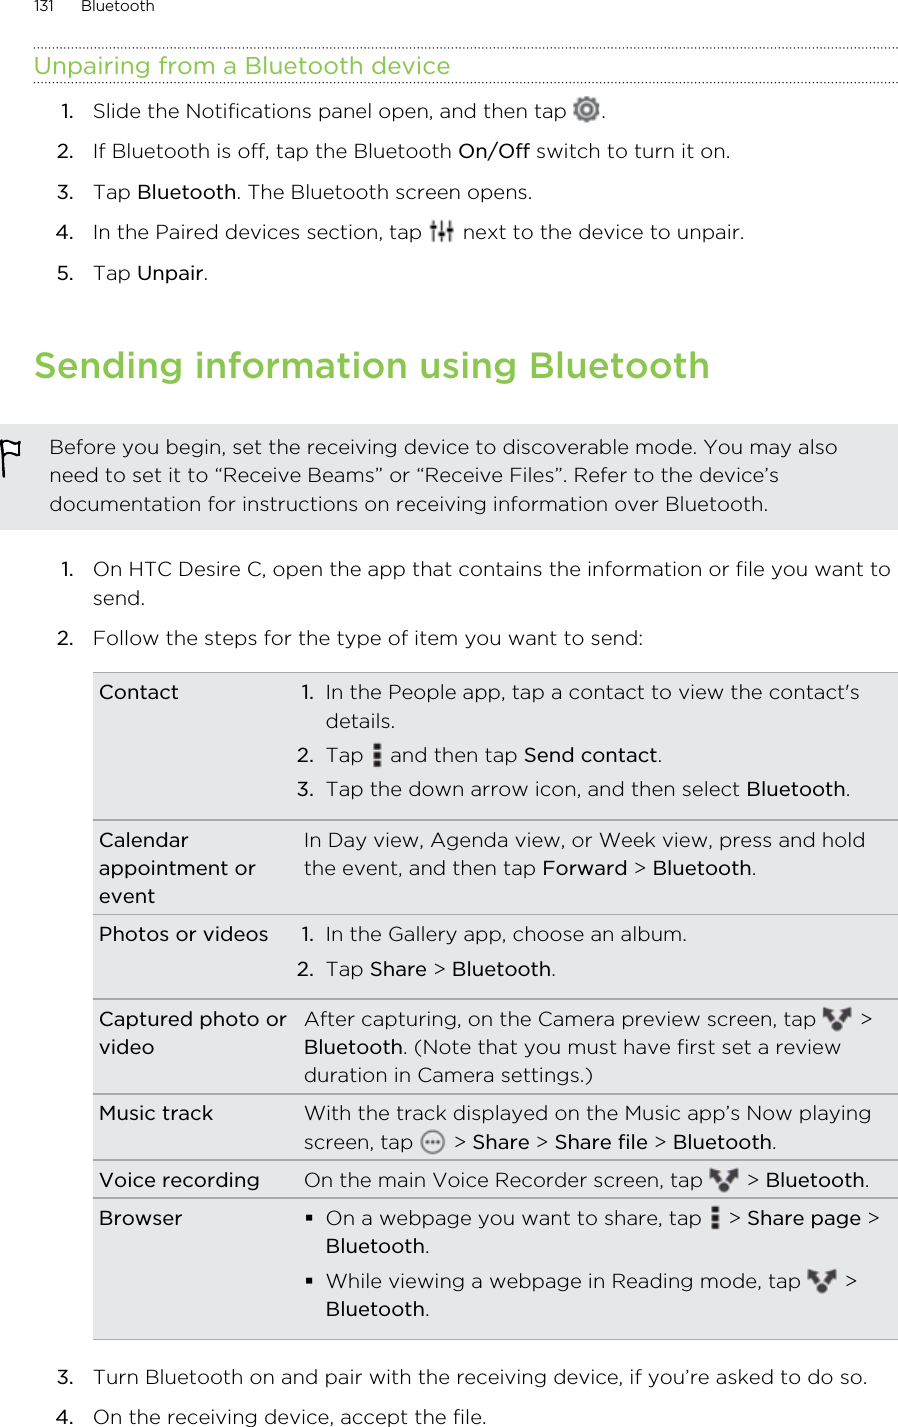 Unpairing from a Bluetooth device1. Slide the Notifications panel open, and then tap  .2. If Bluetooth is off, tap the Bluetooth On/Off switch to turn it on.3. Tap Bluetooth. The Bluetooth screen opens.4. In the Paired devices section, tap   next to the device to unpair.5. Tap Unpair.Sending information using BluetoothBefore you begin, set the receiving device to discoverable mode. You may alsoneed to set it to “Receive Beams” or “Receive Files”. Refer to the device’sdocumentation for instructions on receiving information over Bluetooth.1. On HTC Desire C, open the app that contains the information or file you want tosend.2. Follow the steps for the type of item you want to send:Contact 1. In the People app, tap a contact to view the contact&apos;sdetails.2. Tap   and then tap Send contact.3. Tap the down arrow icon, and then select Bluetooth.Calendarappointment oreventIn Day view, Agenda view, or Week view, press and holdthe event, and then tap Forward &gt; Bluetooth.Photos or videos 1. In the Gallery app, choose an album.2. Tap Share &gt; Bluetooth.Captured photo orvideoAfter capturing, on the Camera preview screen, tap   &gt;Bluetooth. (Note that you must have first set a reviewduration in Camera settings.)Music track With the track displayed on the Music app’s Now playingscreen, tap   &gt; Share &gt; Share file &gt; Bluetooth.Voice recording On the main Voice Recorder screen, tap   &gt; Bluetooth.Browser On a webpage you want to share, tap   &gt; Share page &gt;Bluetooth.While viewing a webpage in Reading mode, tap   &gt;Bluetooth.3. Turn Bluetooth on and pair with the receiving device, if you’re asked to do so.4. On the receiving device, accept the file.131 Bluetooth